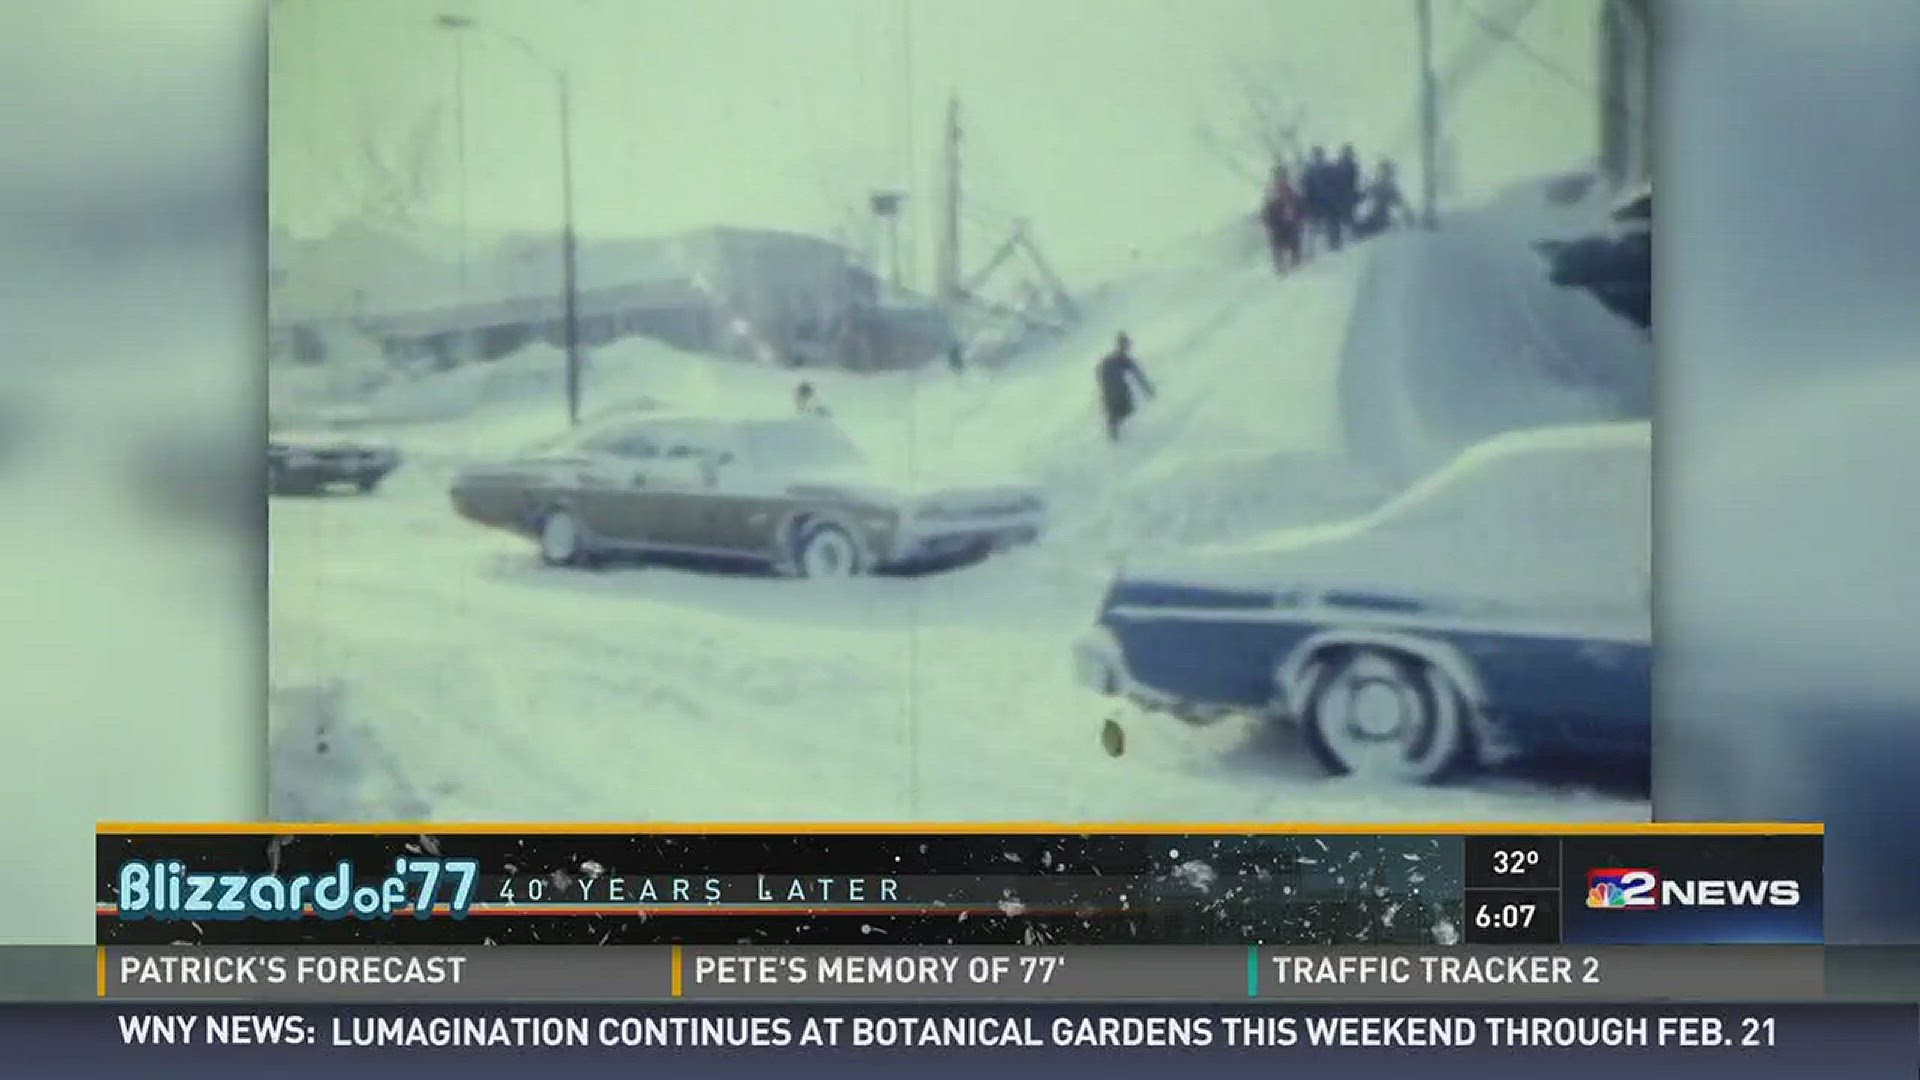 2017 marks the 40th Anniversary of the Blizzard of '77. Daybreak begins taking a look back to that fateful storm.